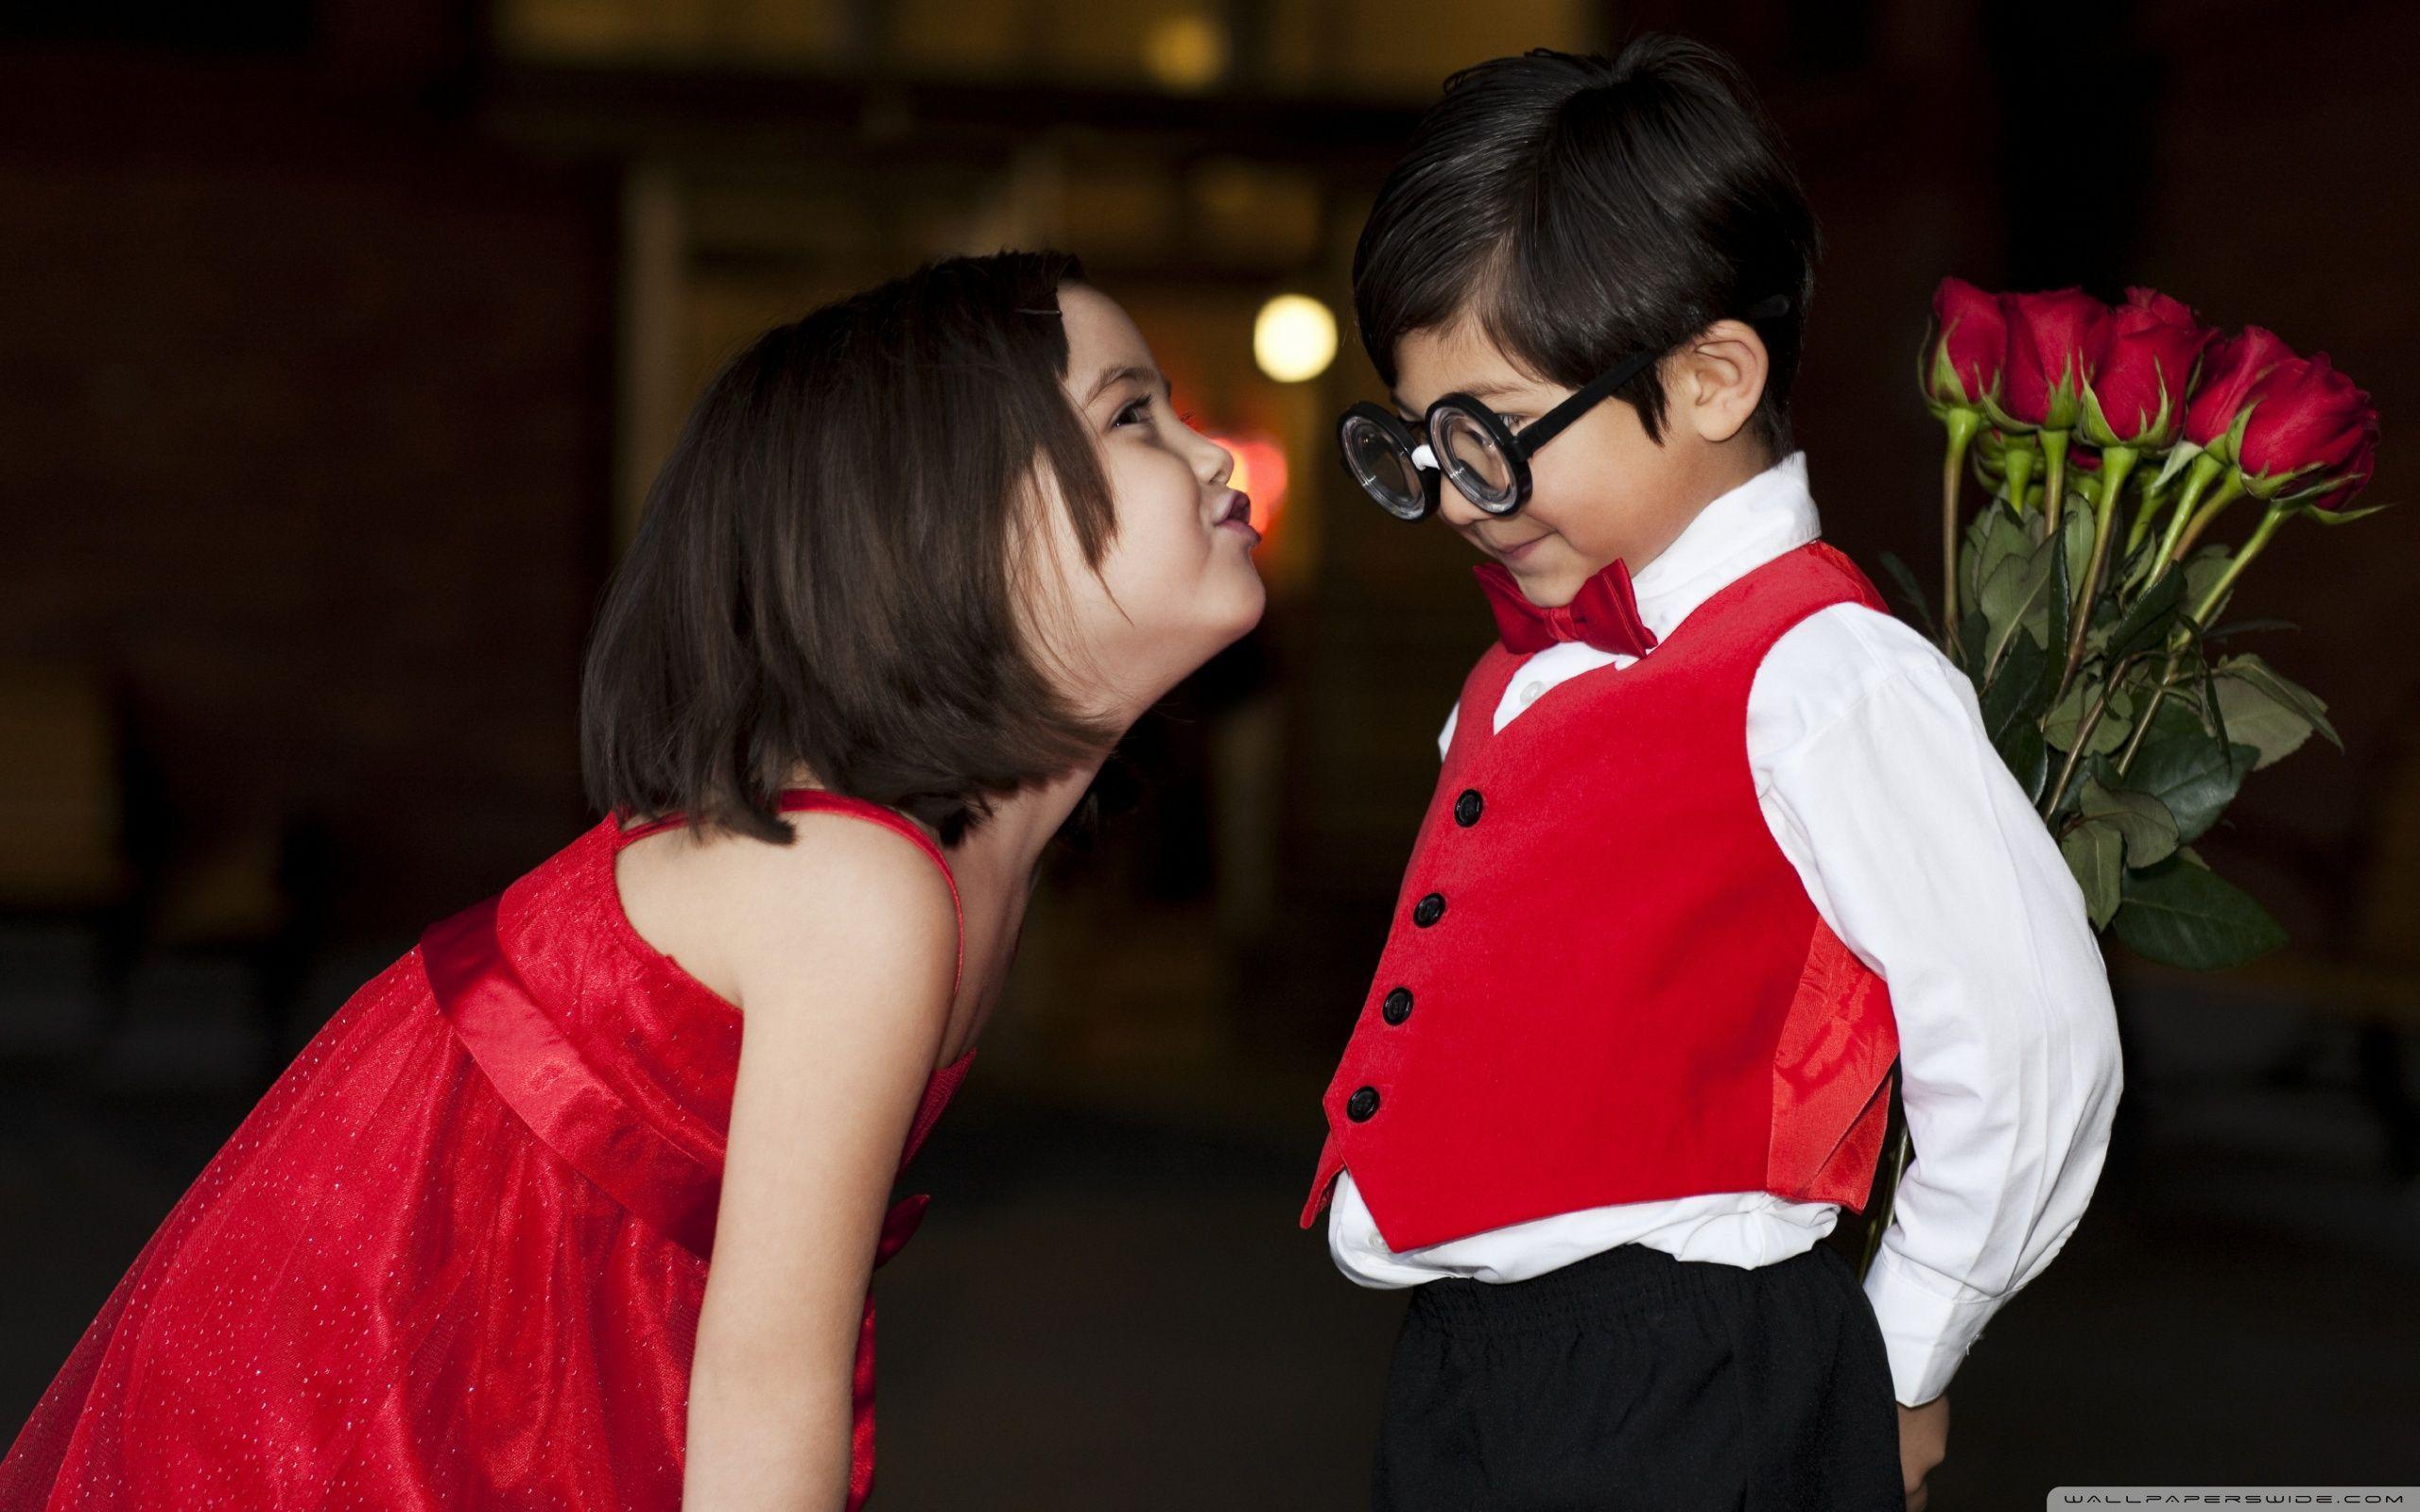 Glasses, Cute couple, Roses, Boy and girl wallpaper and image